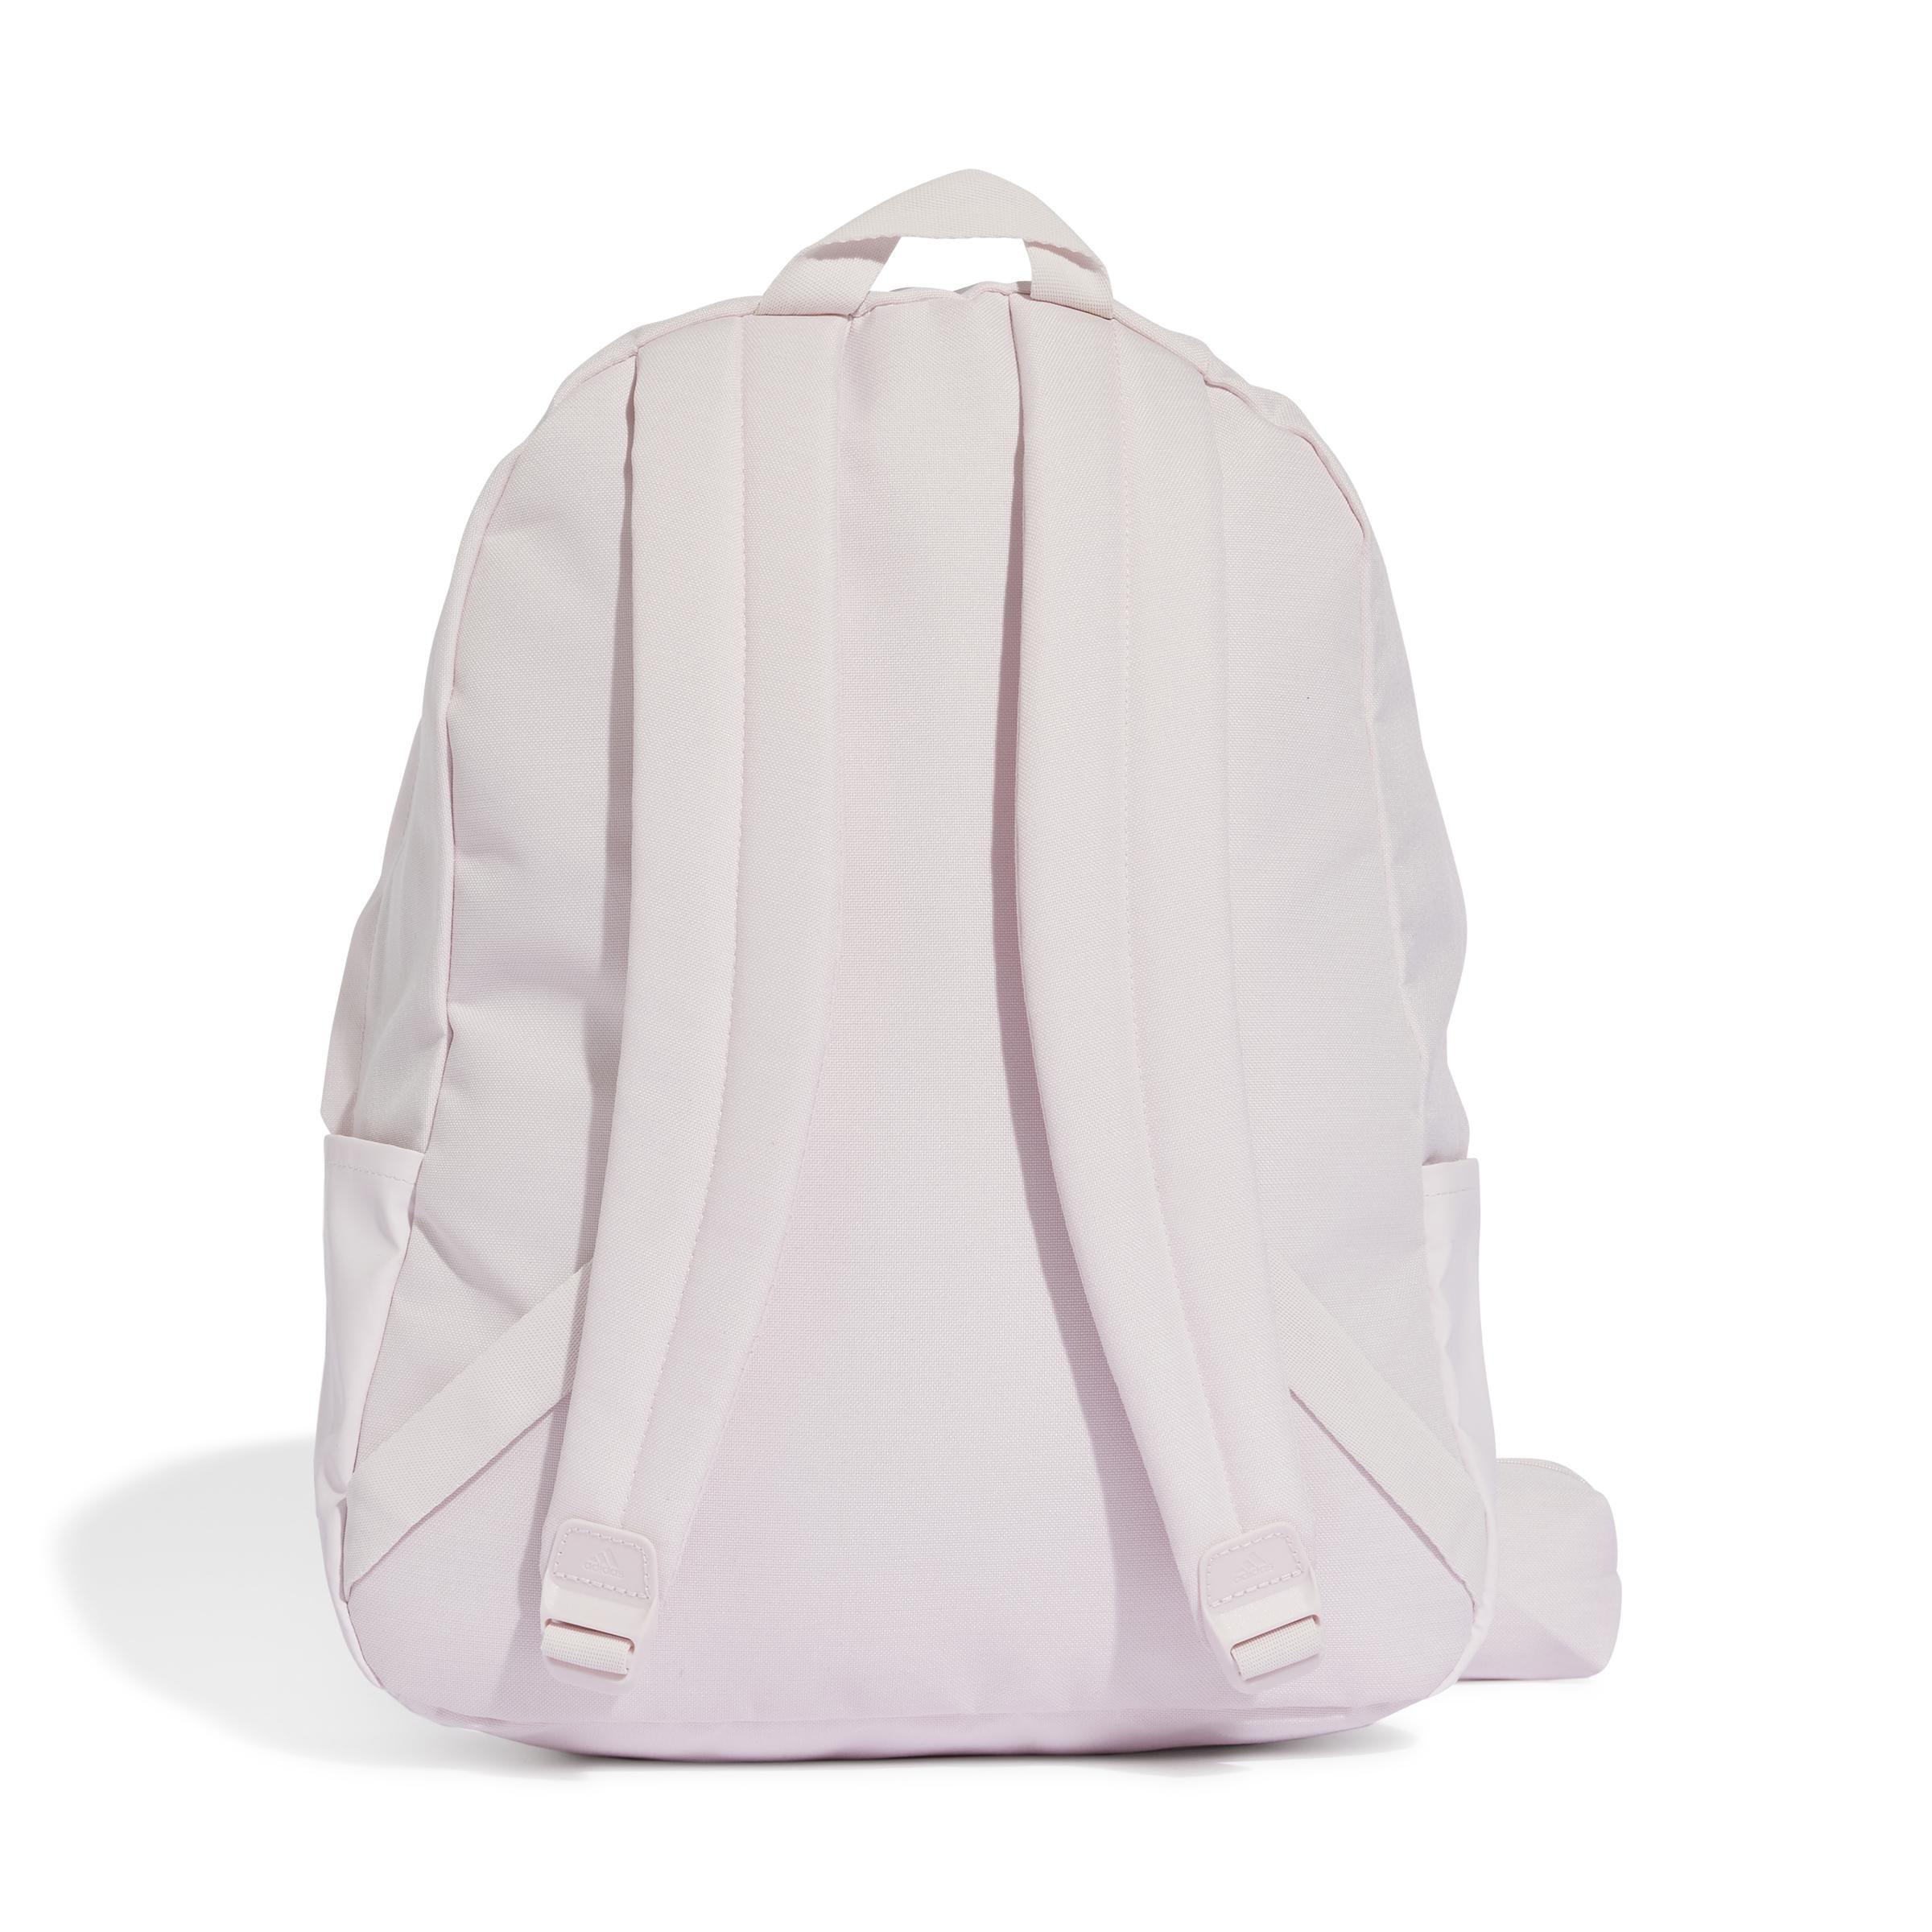 adidas - Unisex Classic 3-Stripes Backpack, Pink